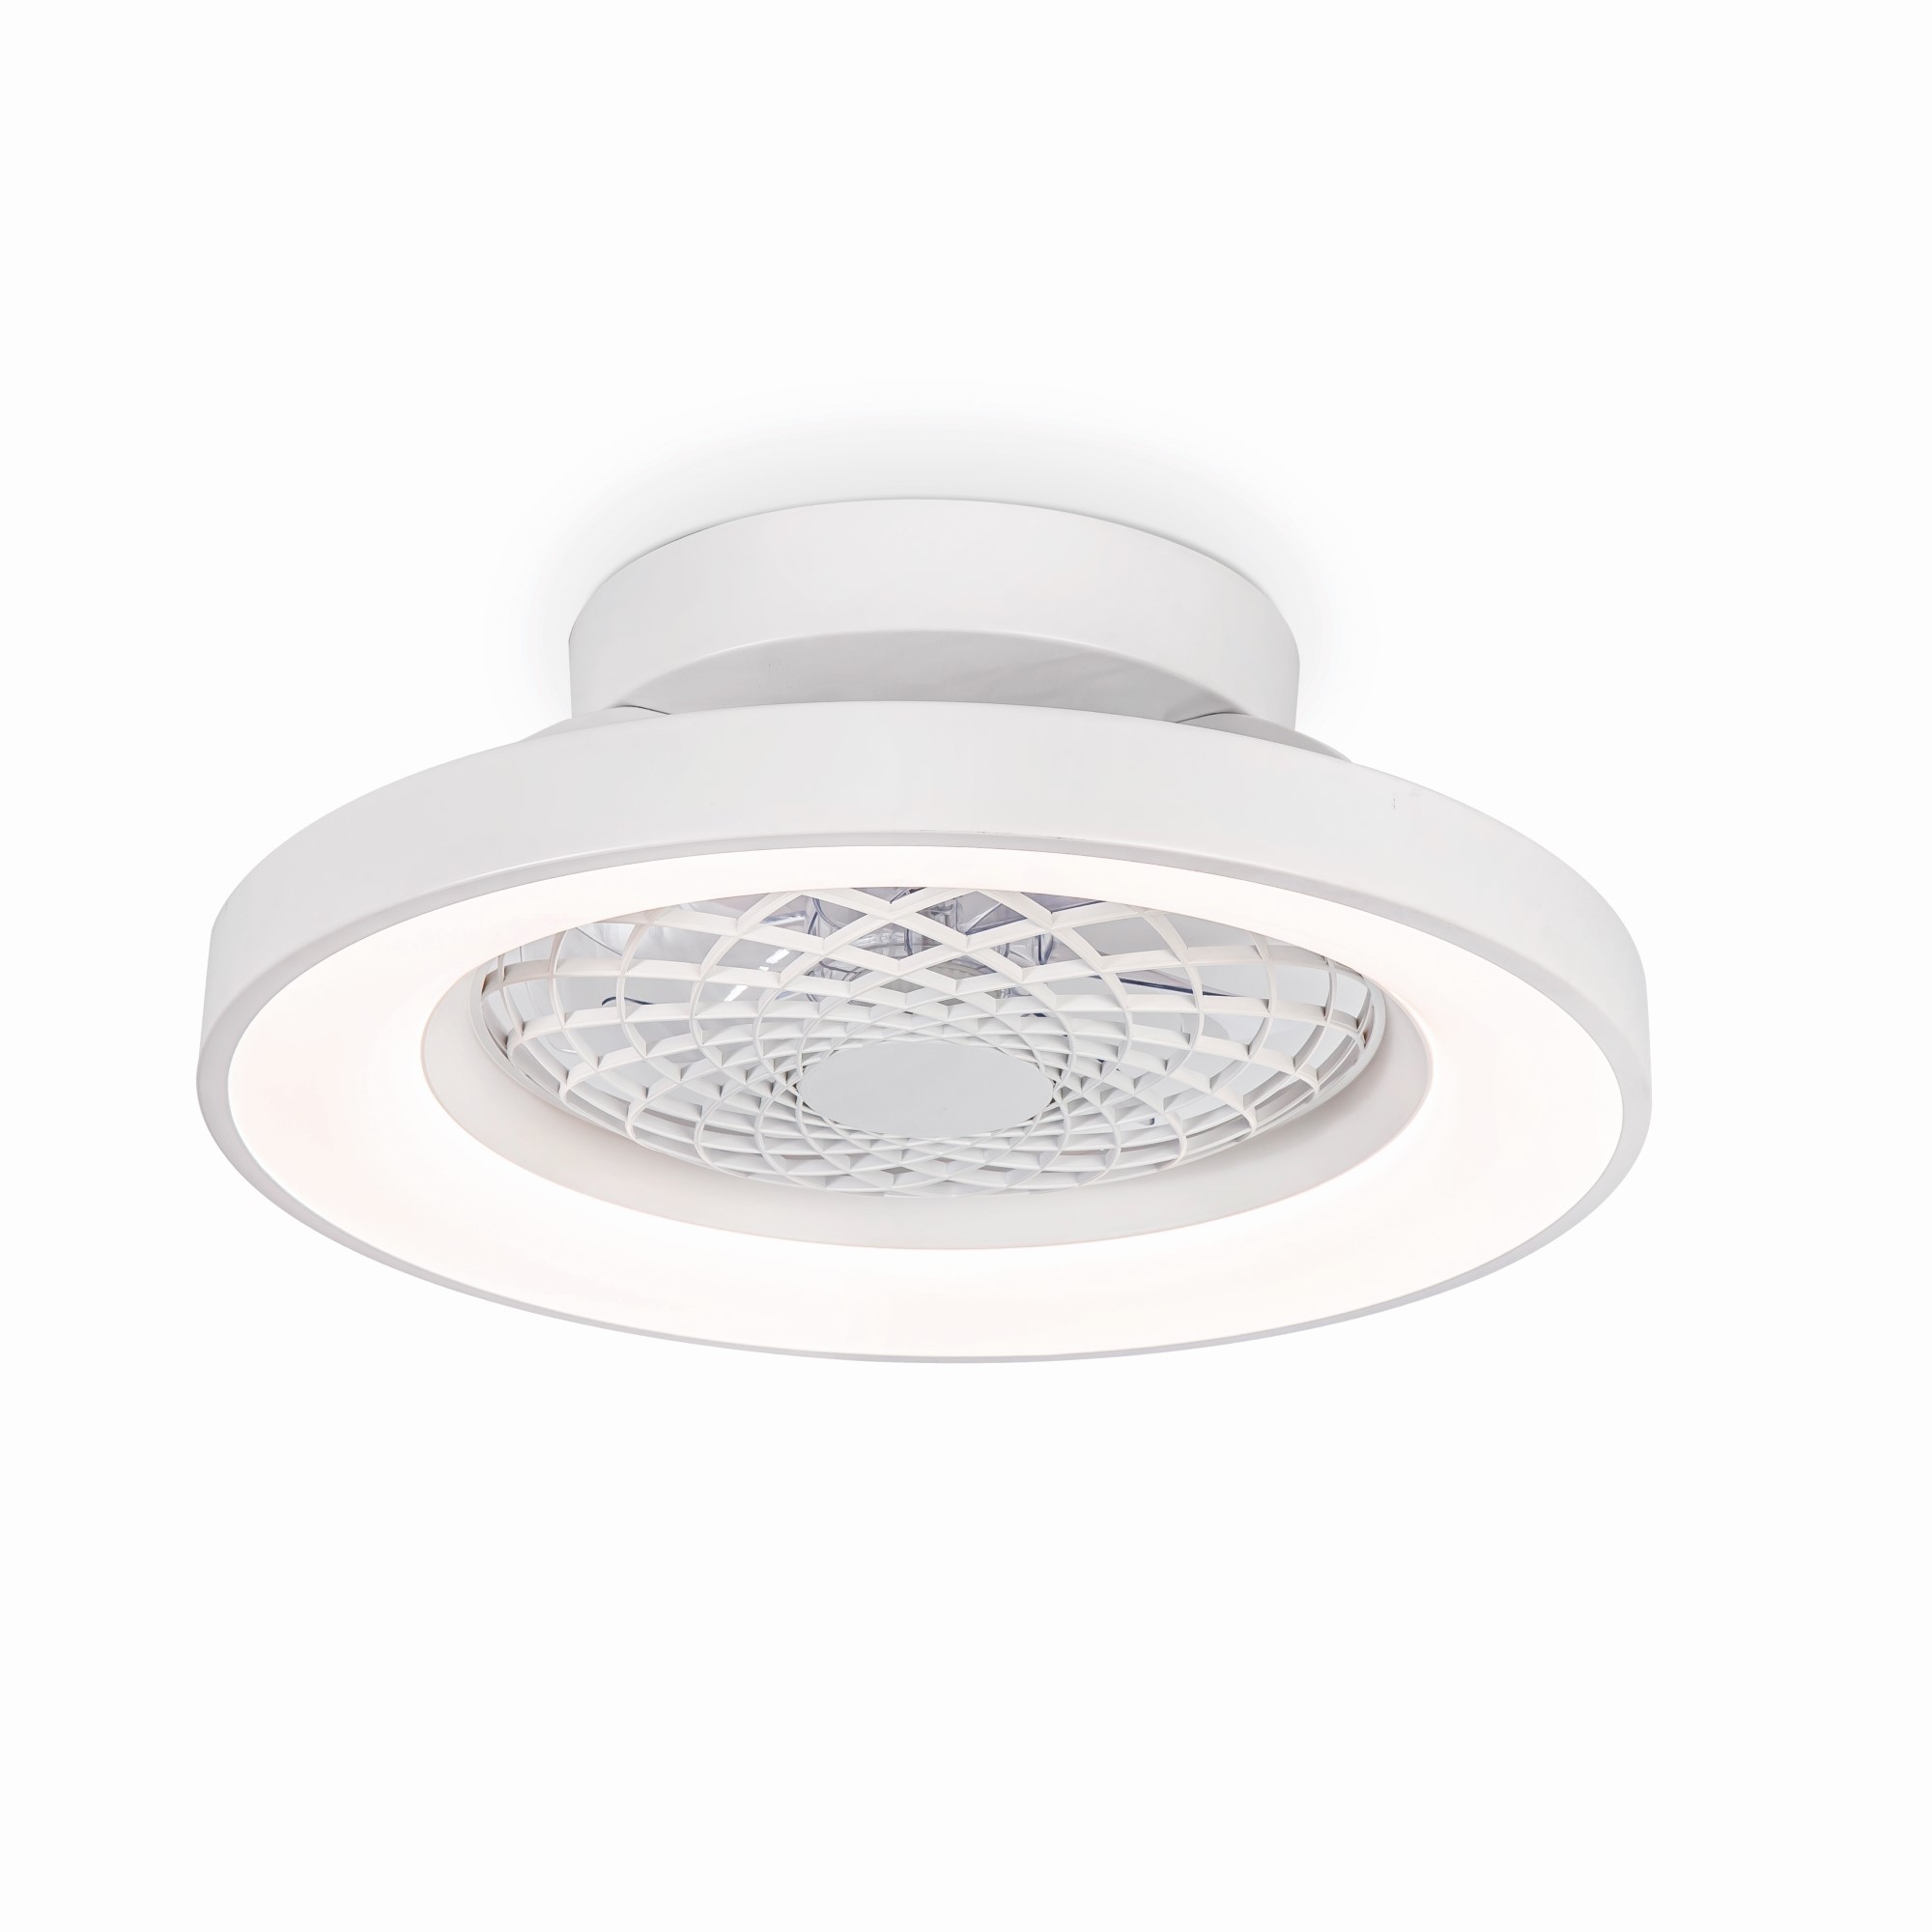 M7804  Tibet Mini 70W LED Dimmable Ceiling Light & Fan, Remote Controlled